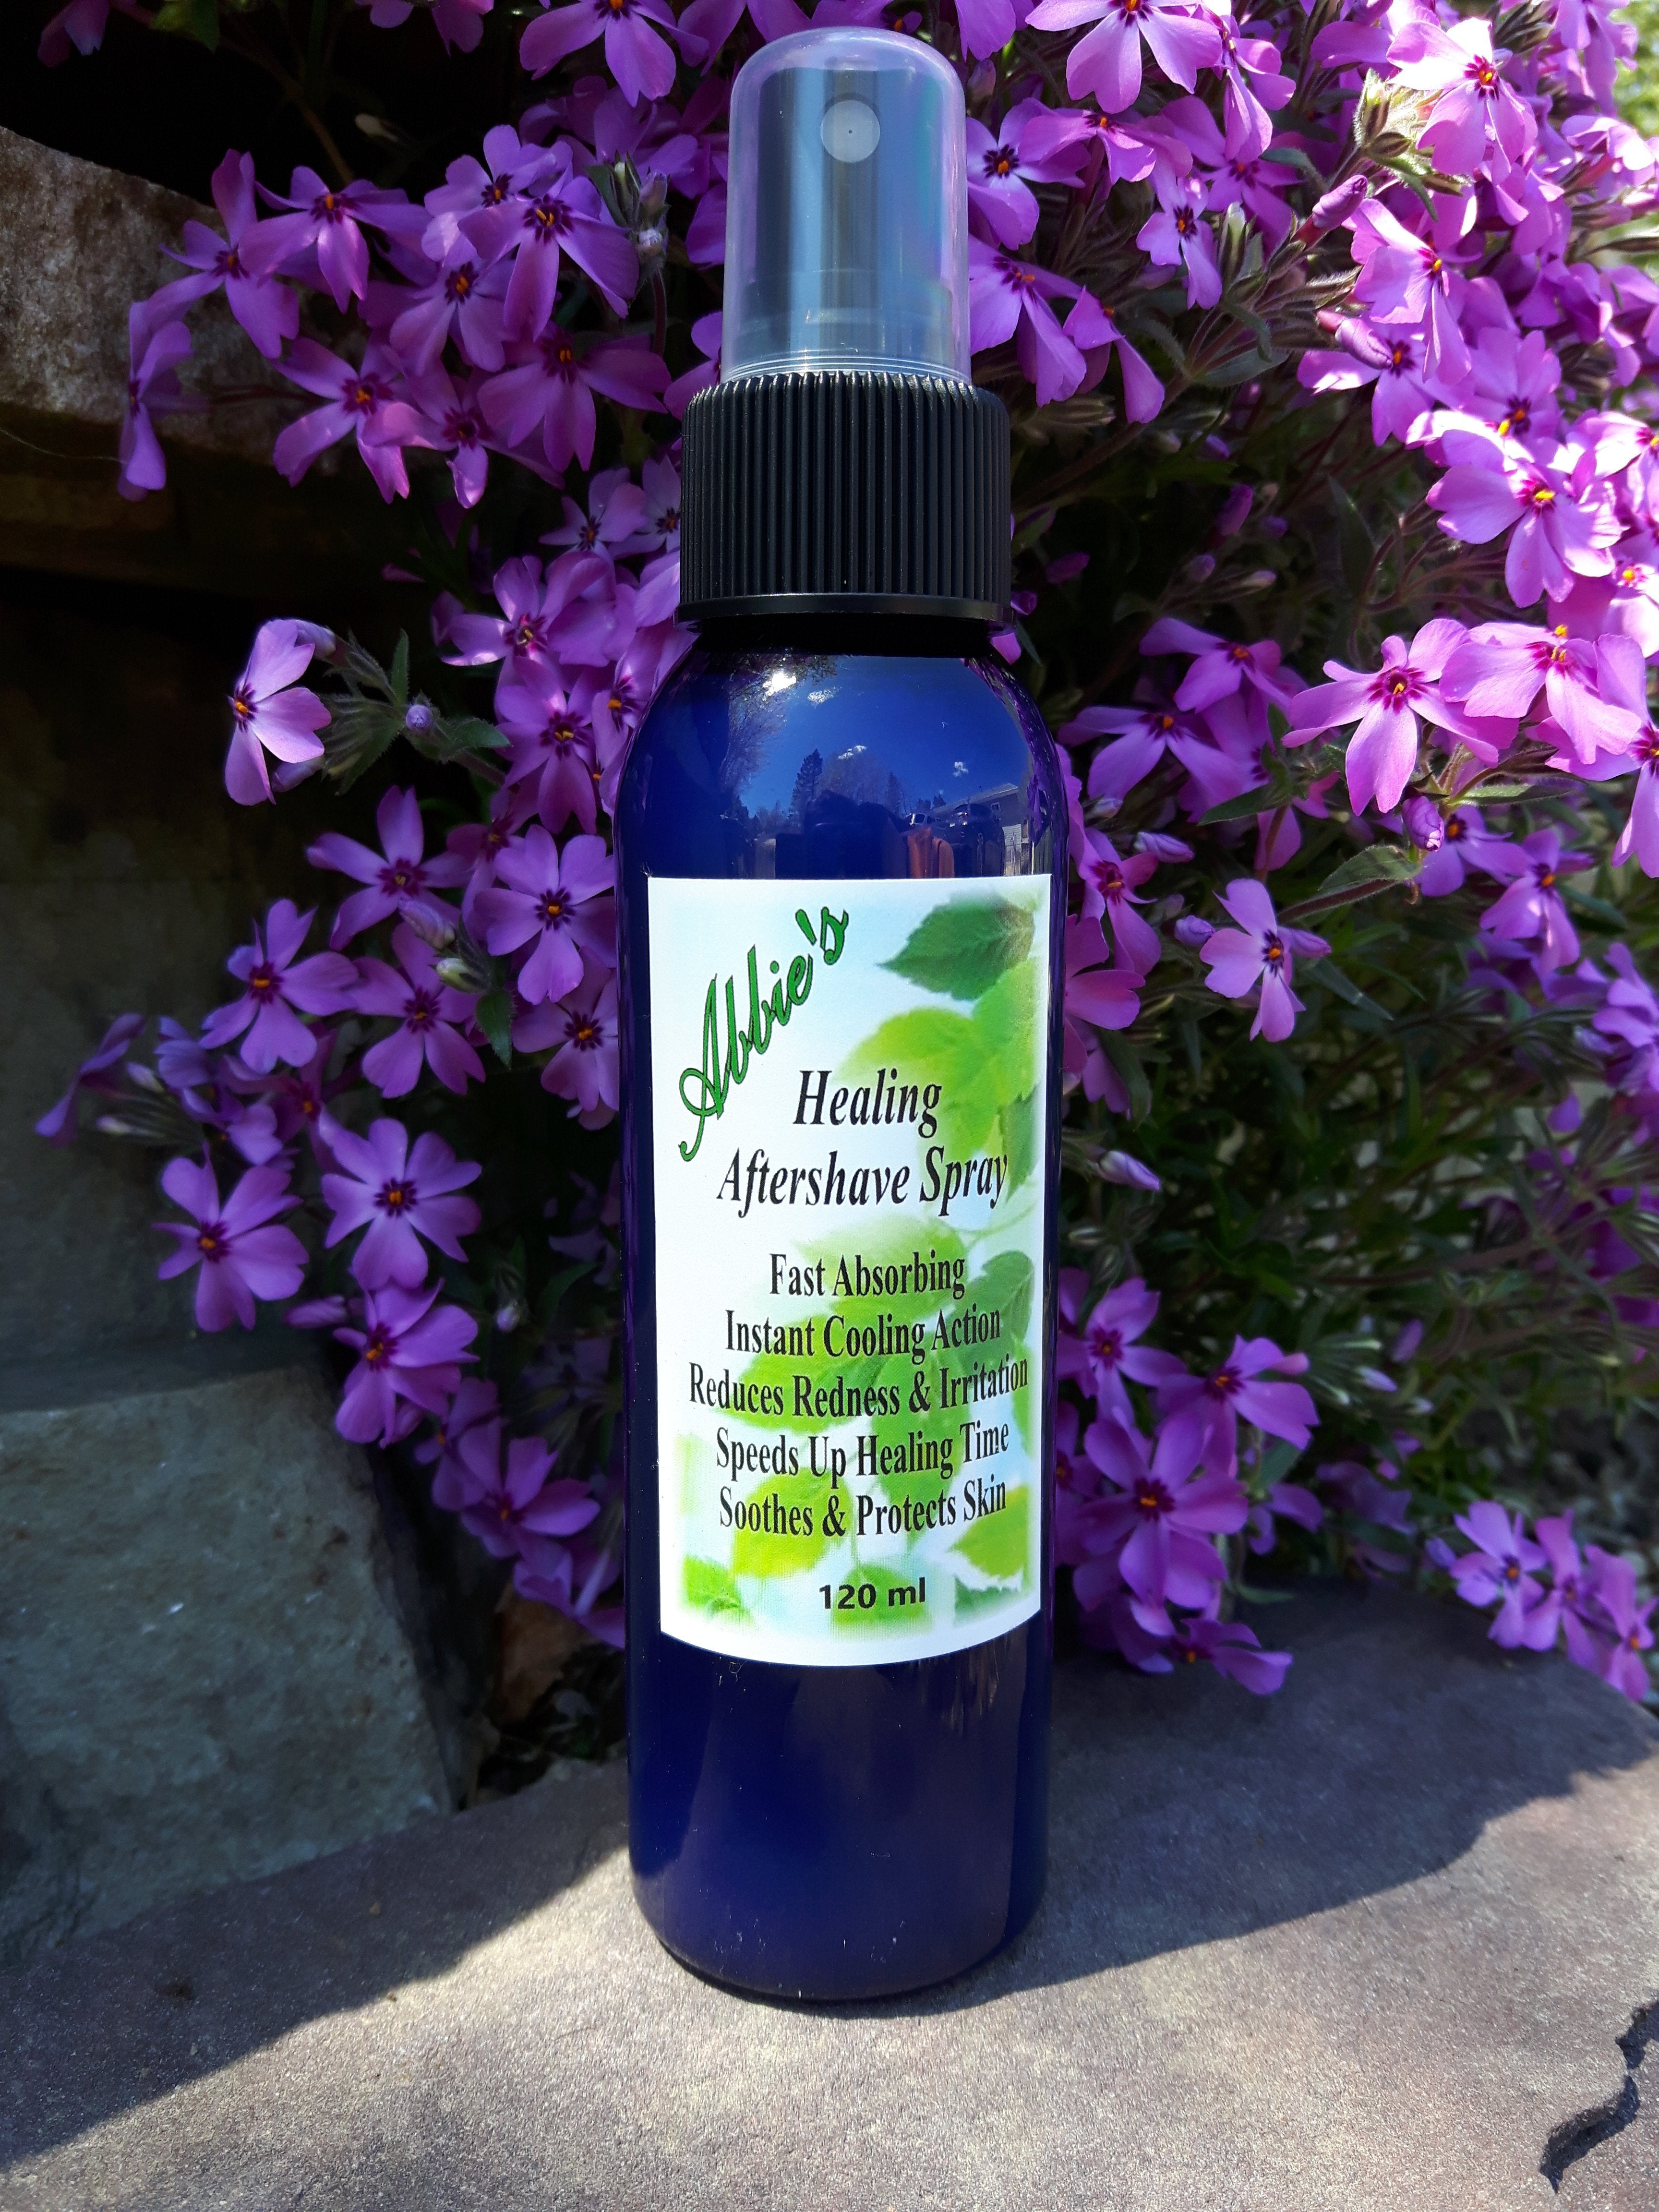 Healing Aftershave Spray 120ml - Abbie's Natural Skin Care Products